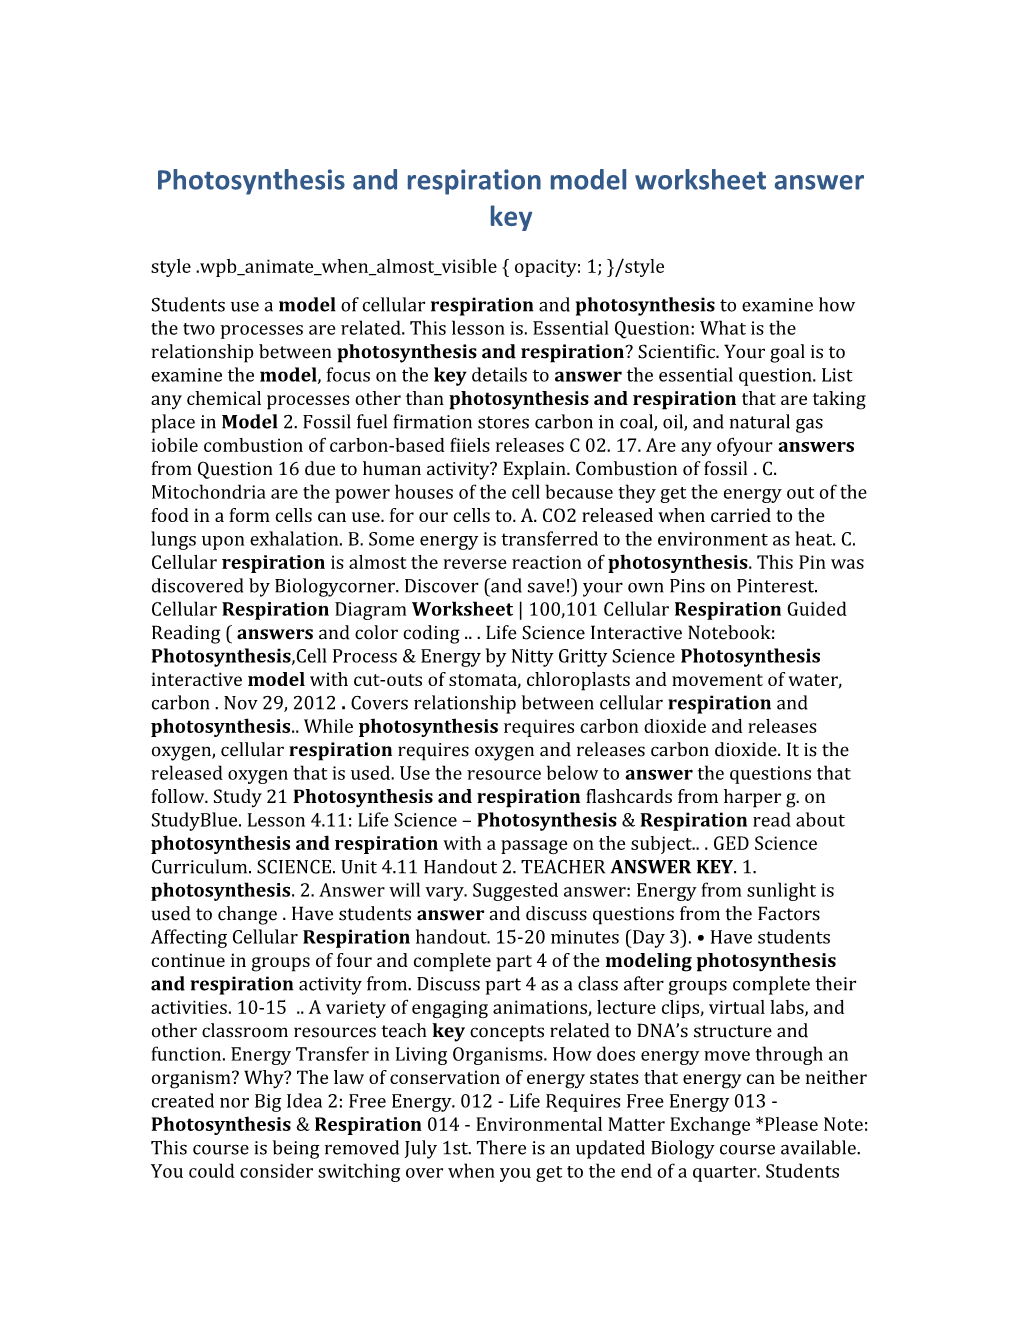 Photosynthesis and Respiration Model Worksheet Answer Key